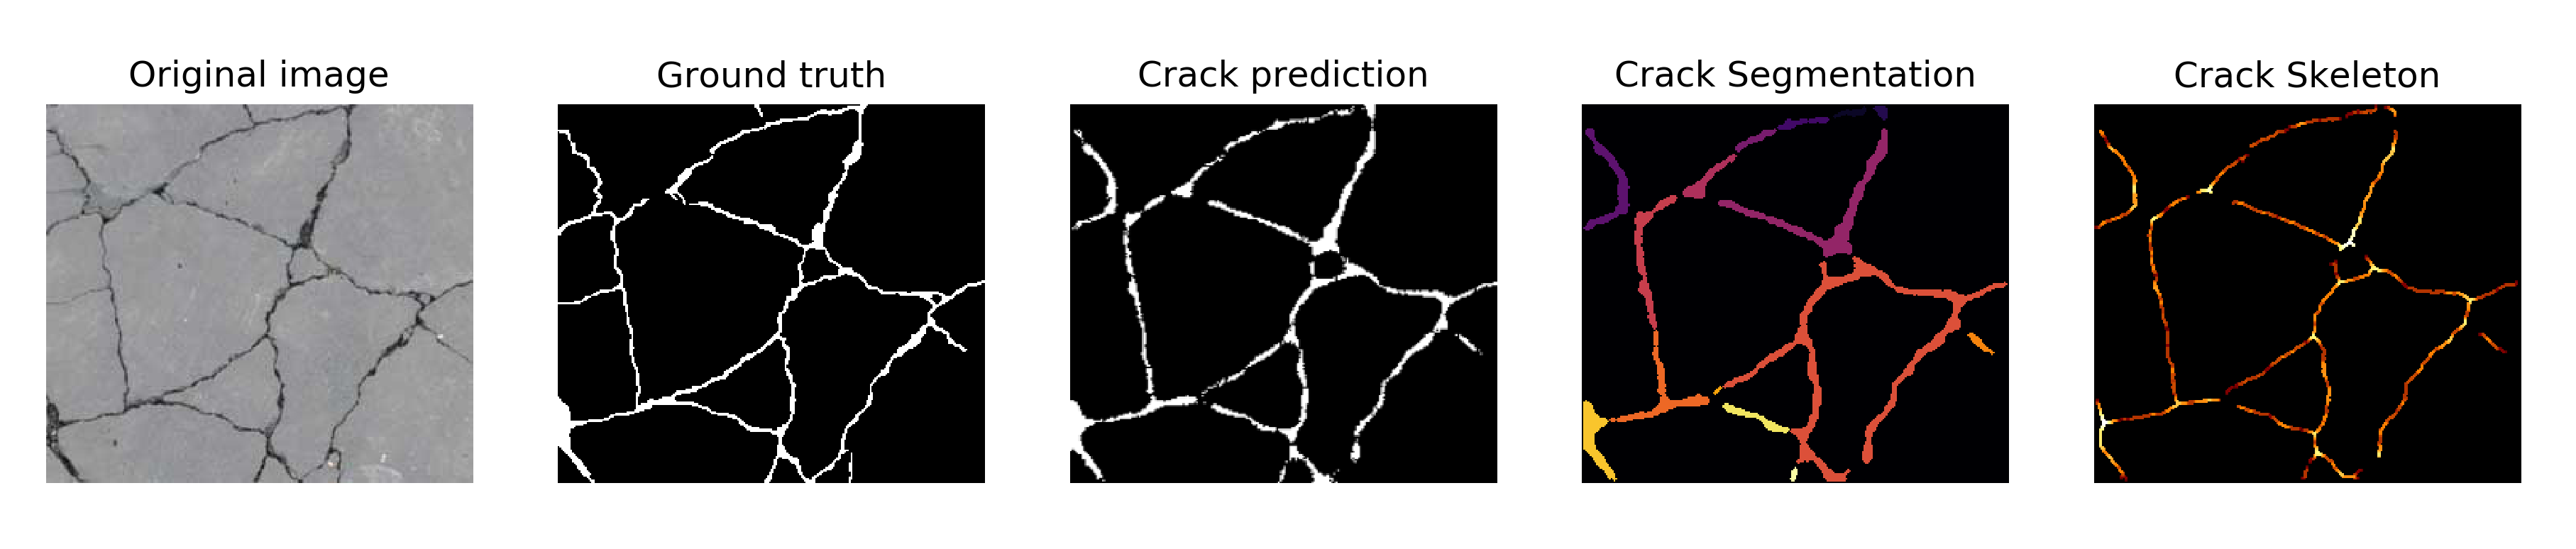 crack_cp_0619.png